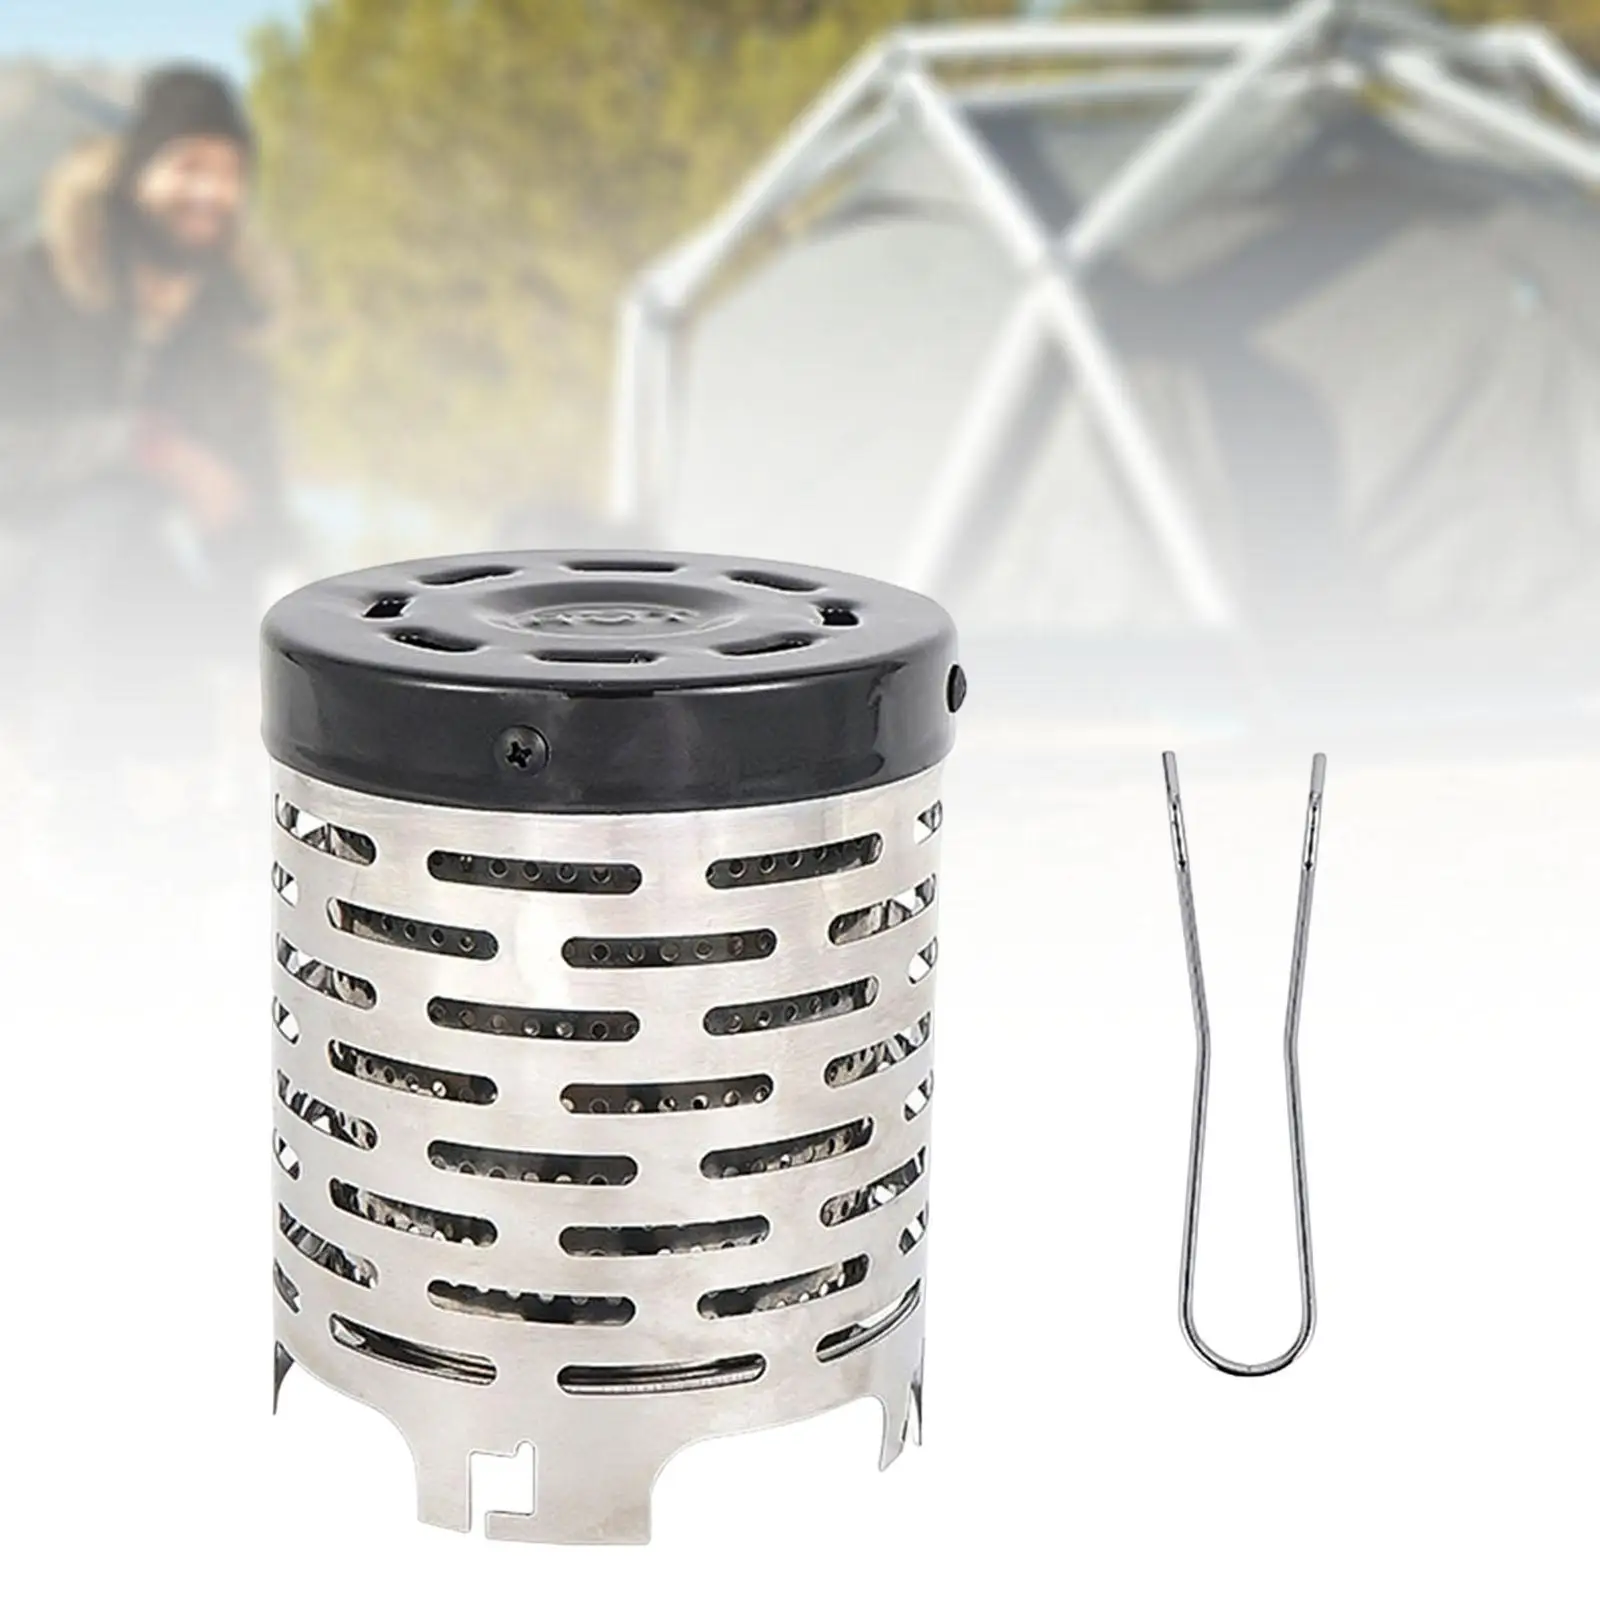 Outdoor Camping Mini Heater Stove Tent Heating Stove for Backpacking BBQ